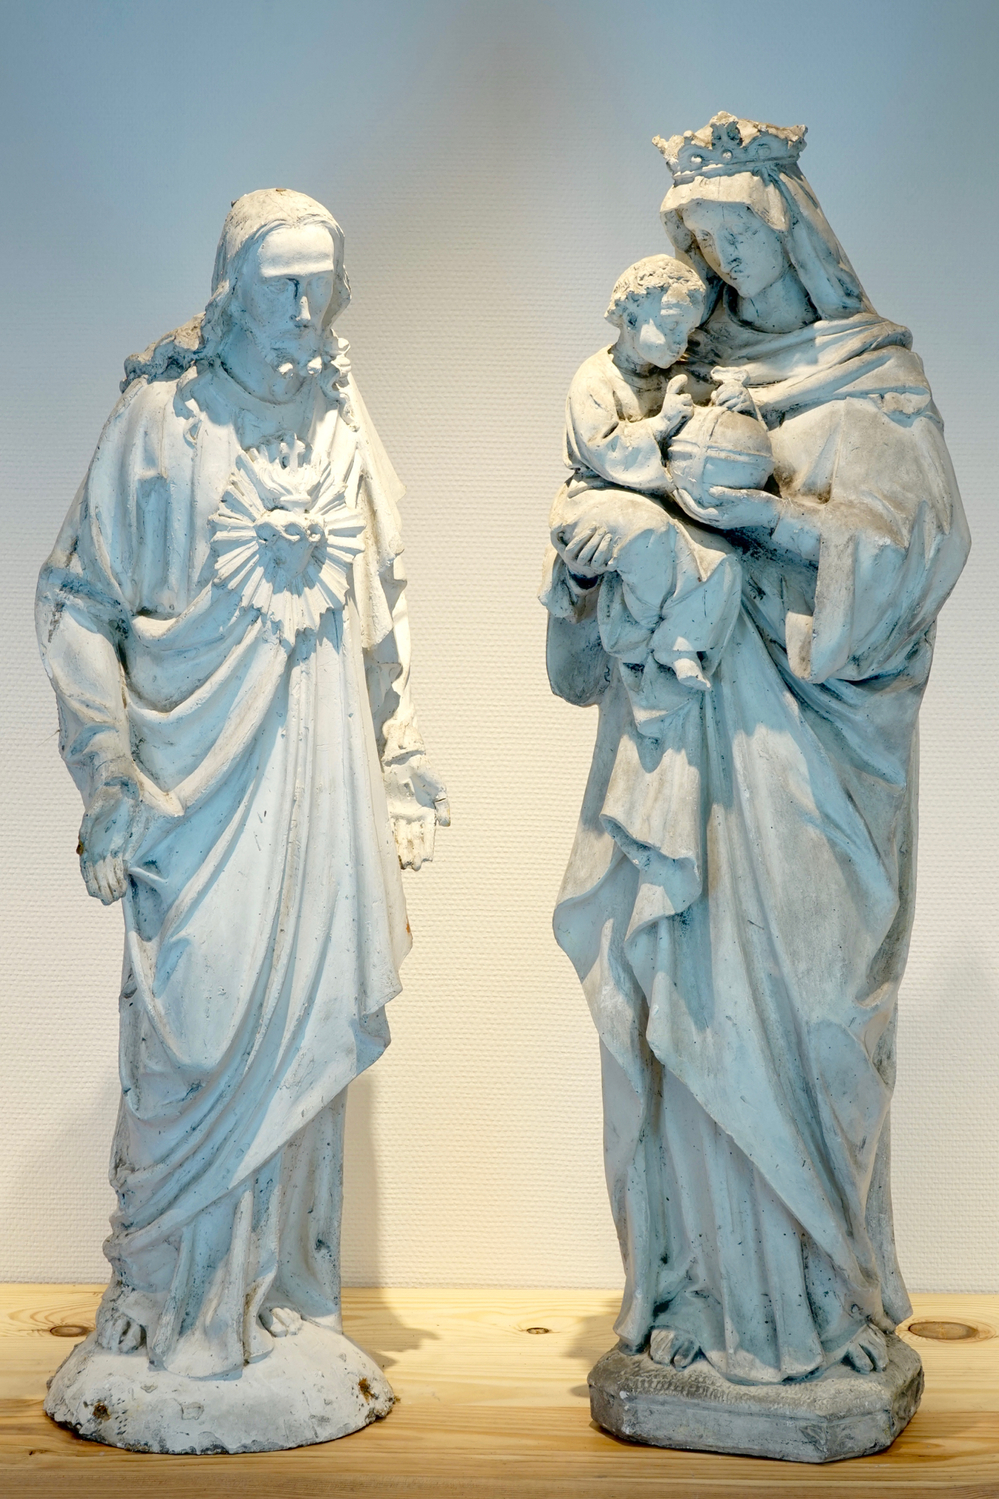 A set of two 100 cm plaster casts Mary with Child and Christ with the sacred heart, 19/20th C., Bruges